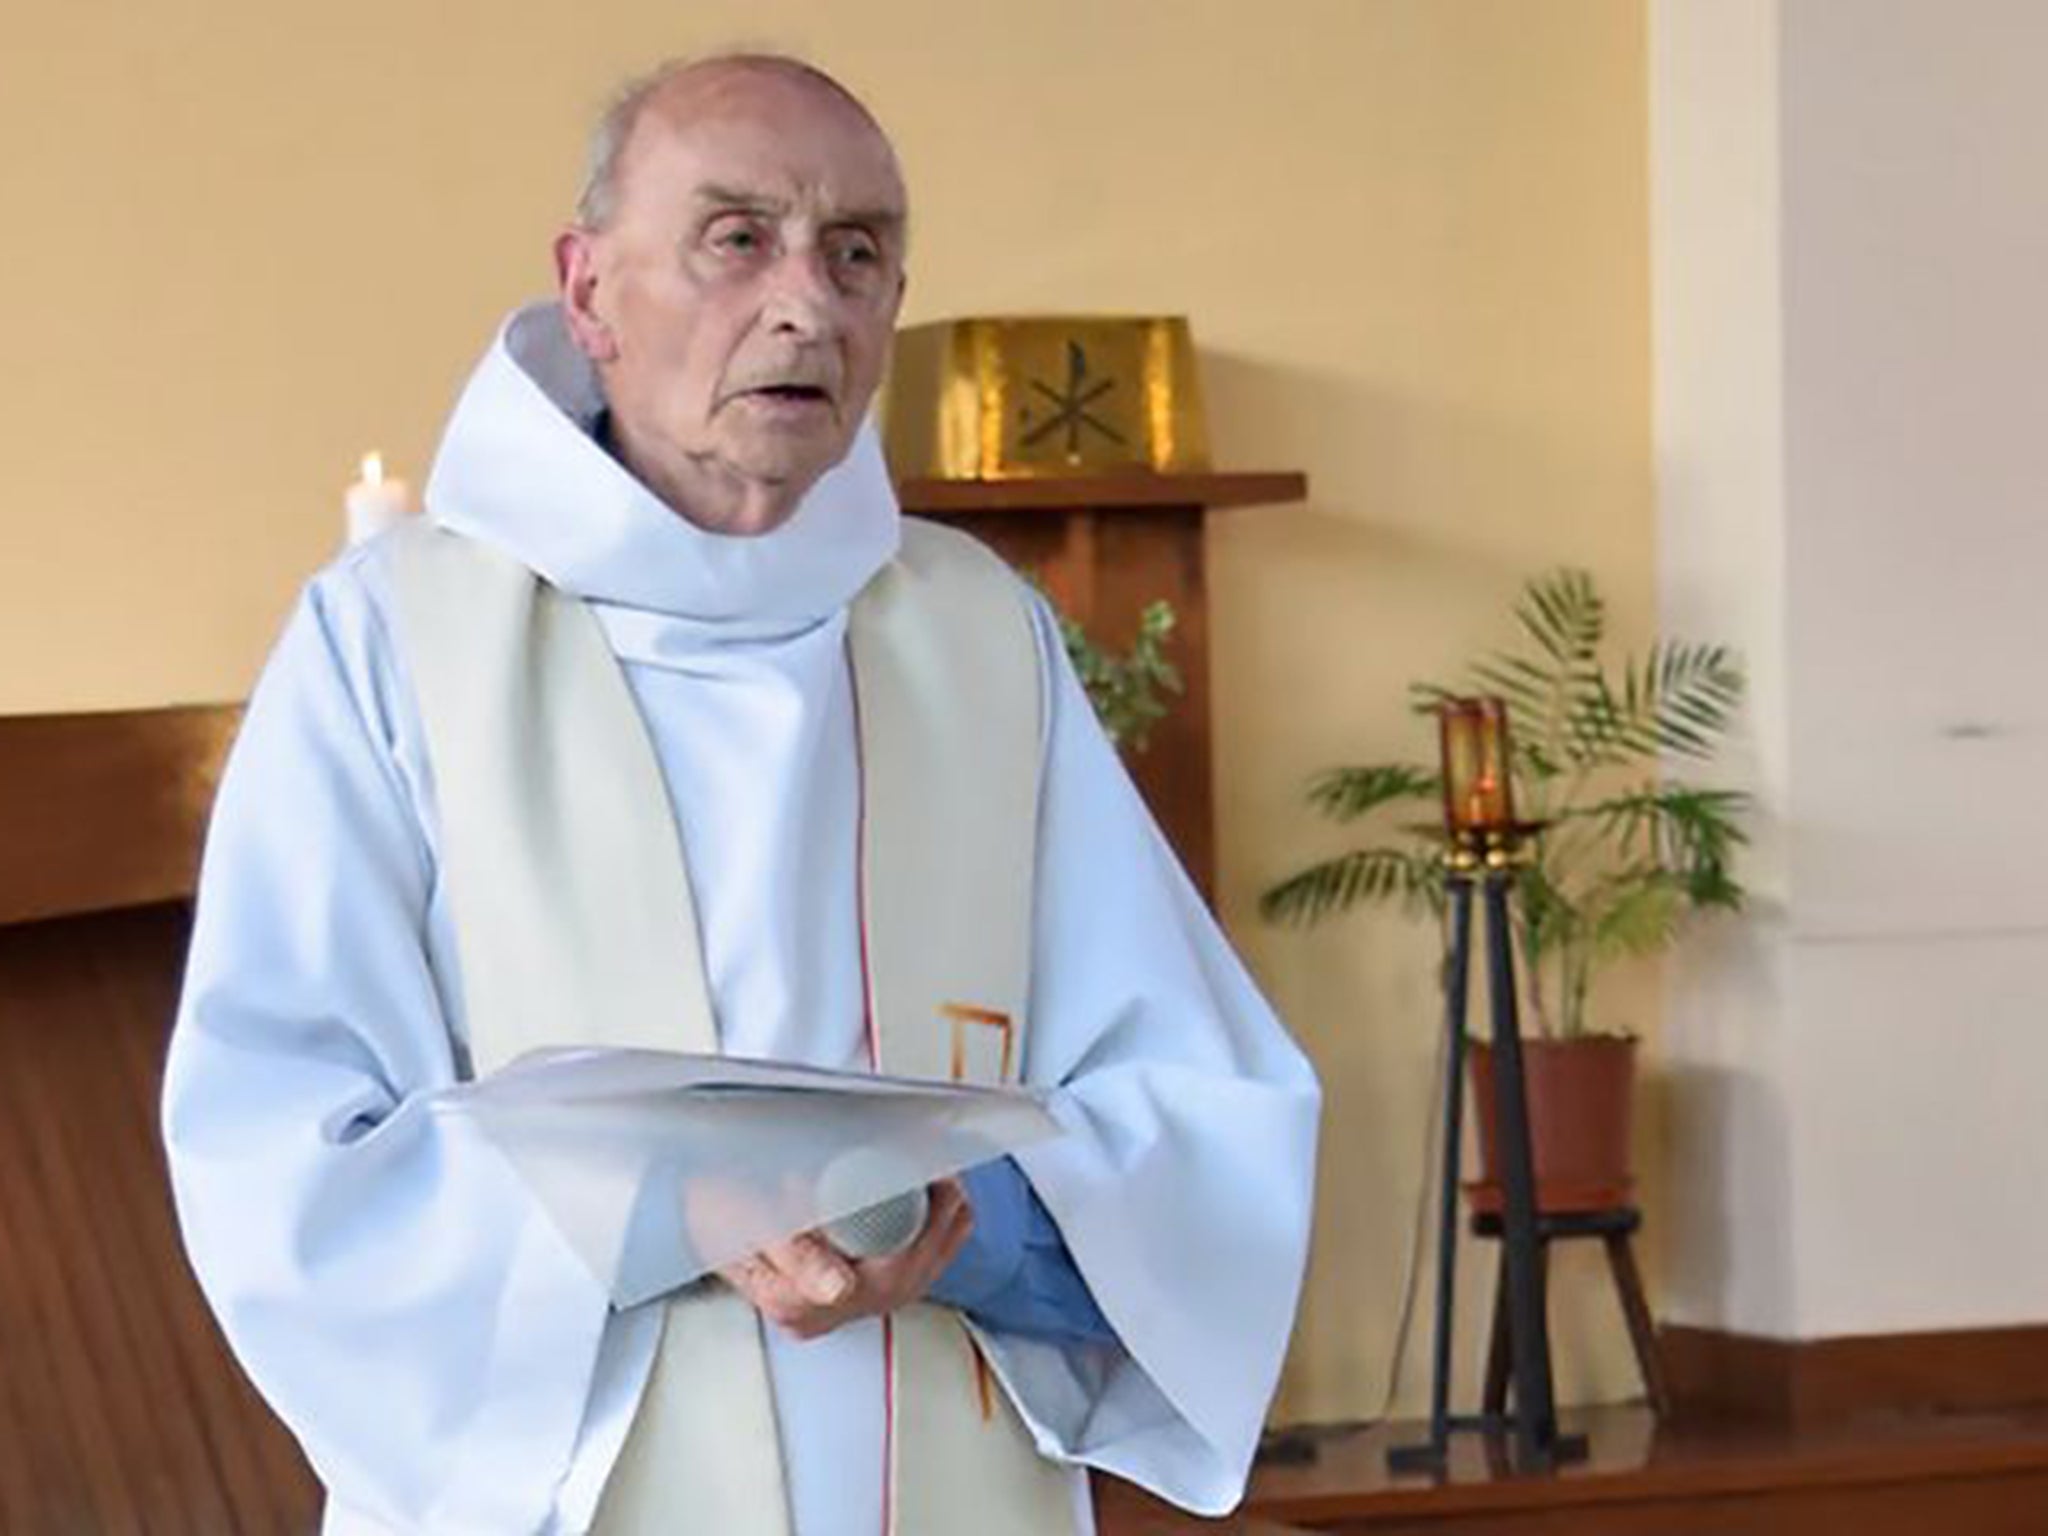 The late priest Jacques Hamel